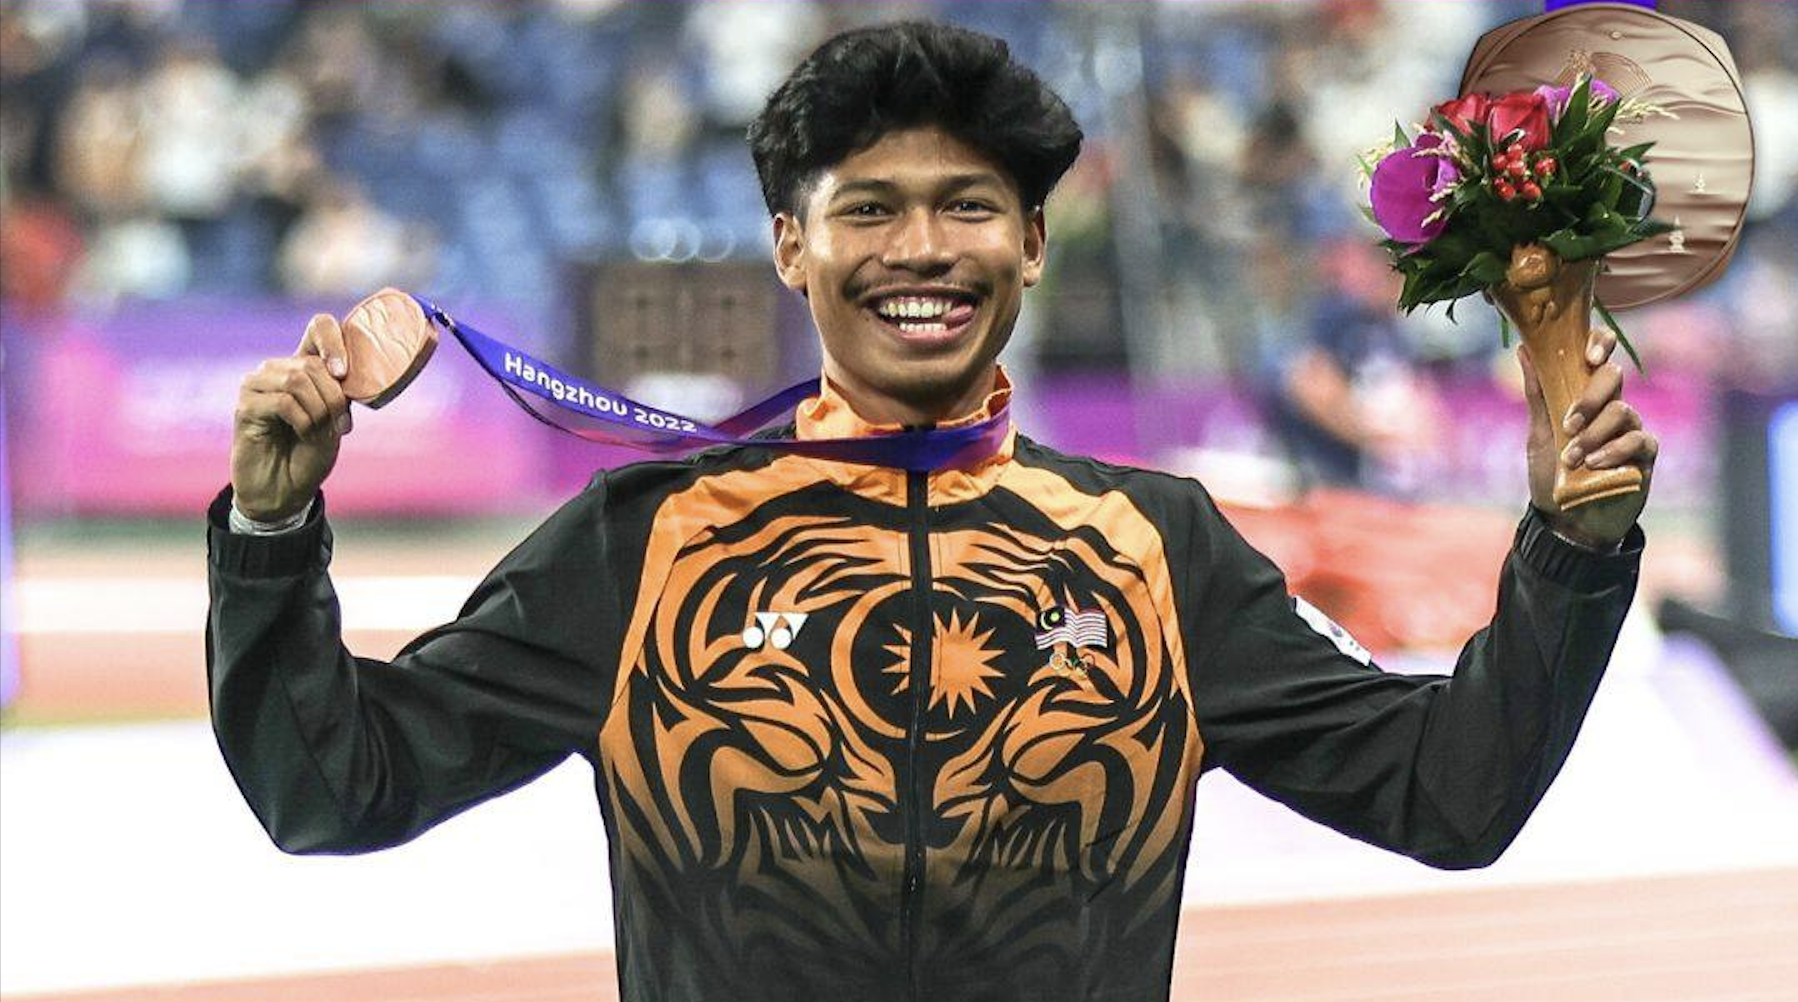 Azeem aims high: qualifying for Paris Olympics top priority